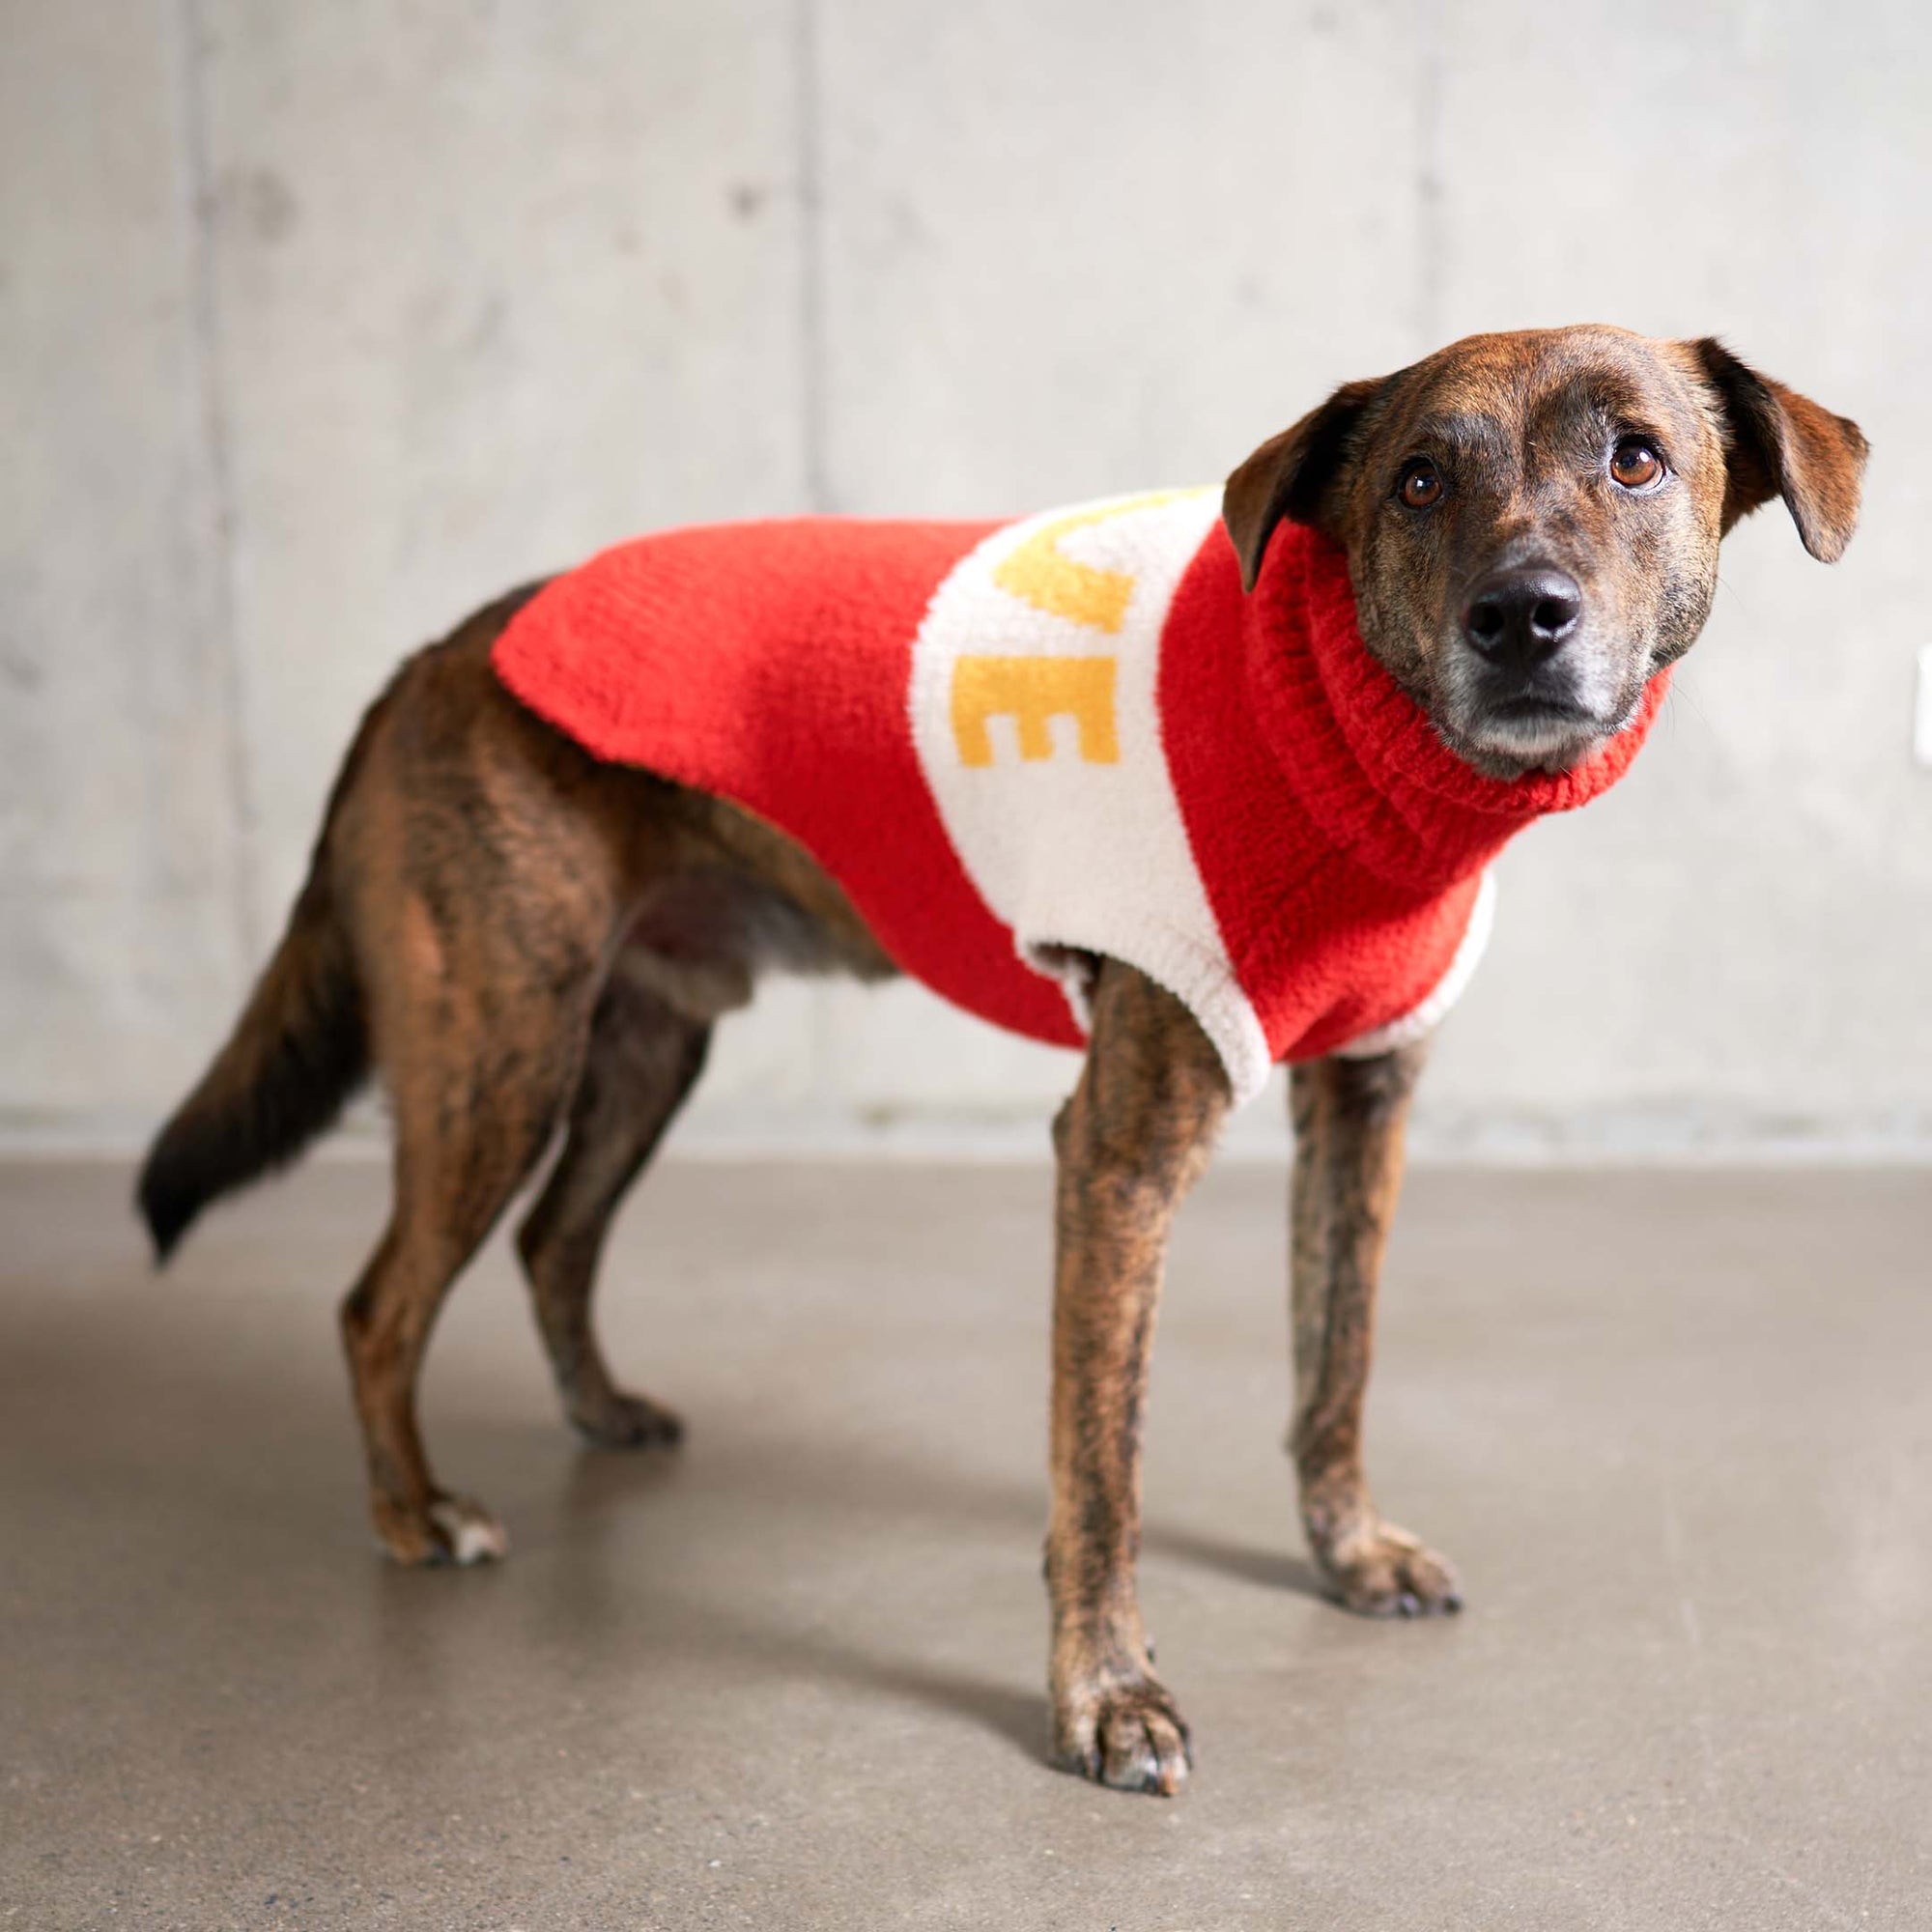 A brindle dog with a watchful gaze models a vibrant red and white sweater, the word "LOVE" adding a splash of warmth and affection to the image.